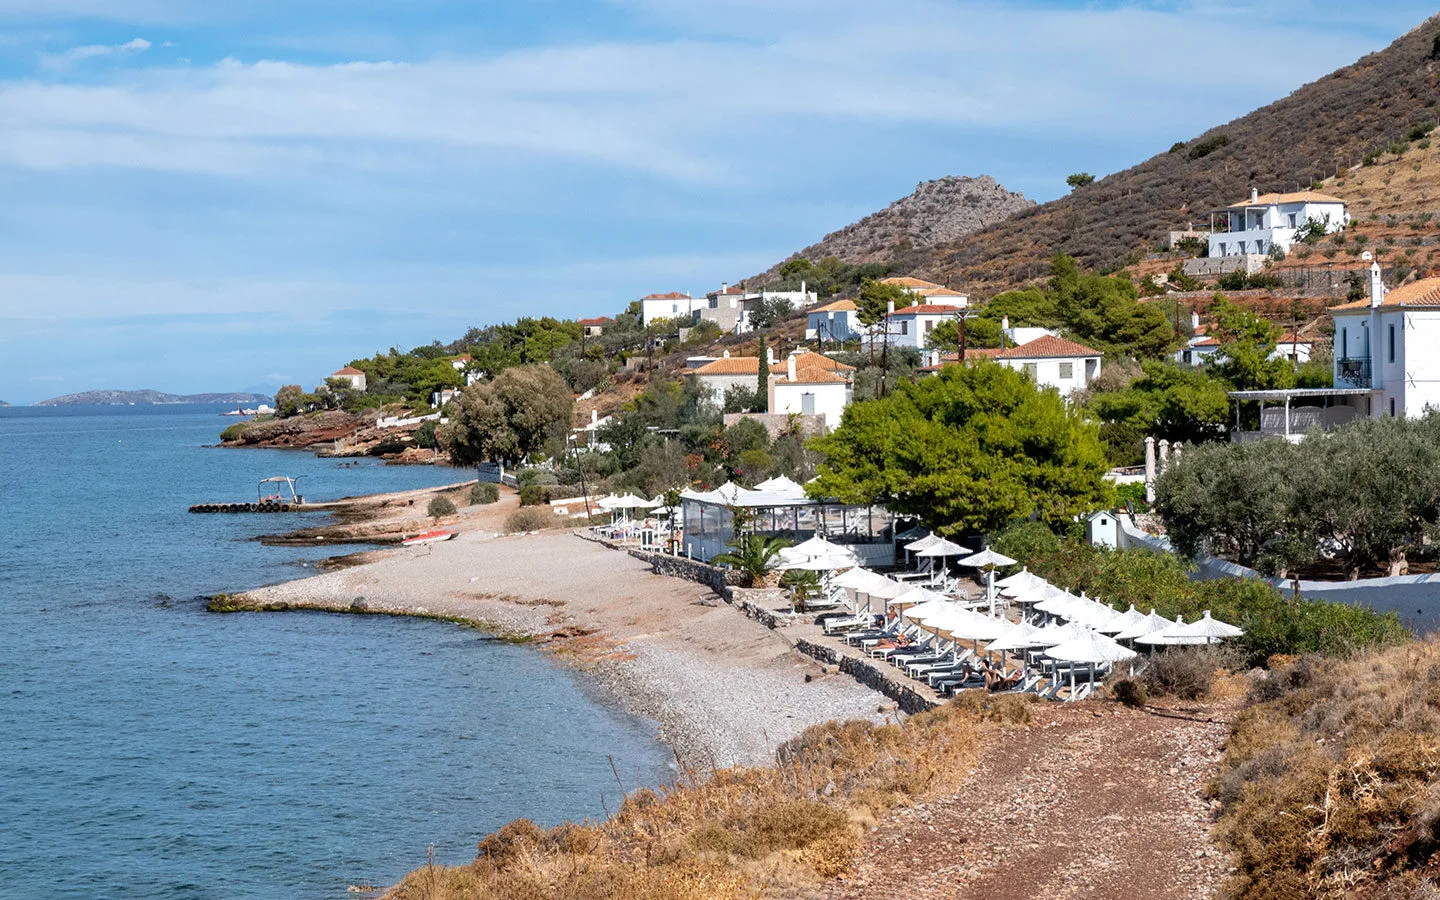 Beach days at the Four Seasons, one of the best things to do in Hydra, Greece